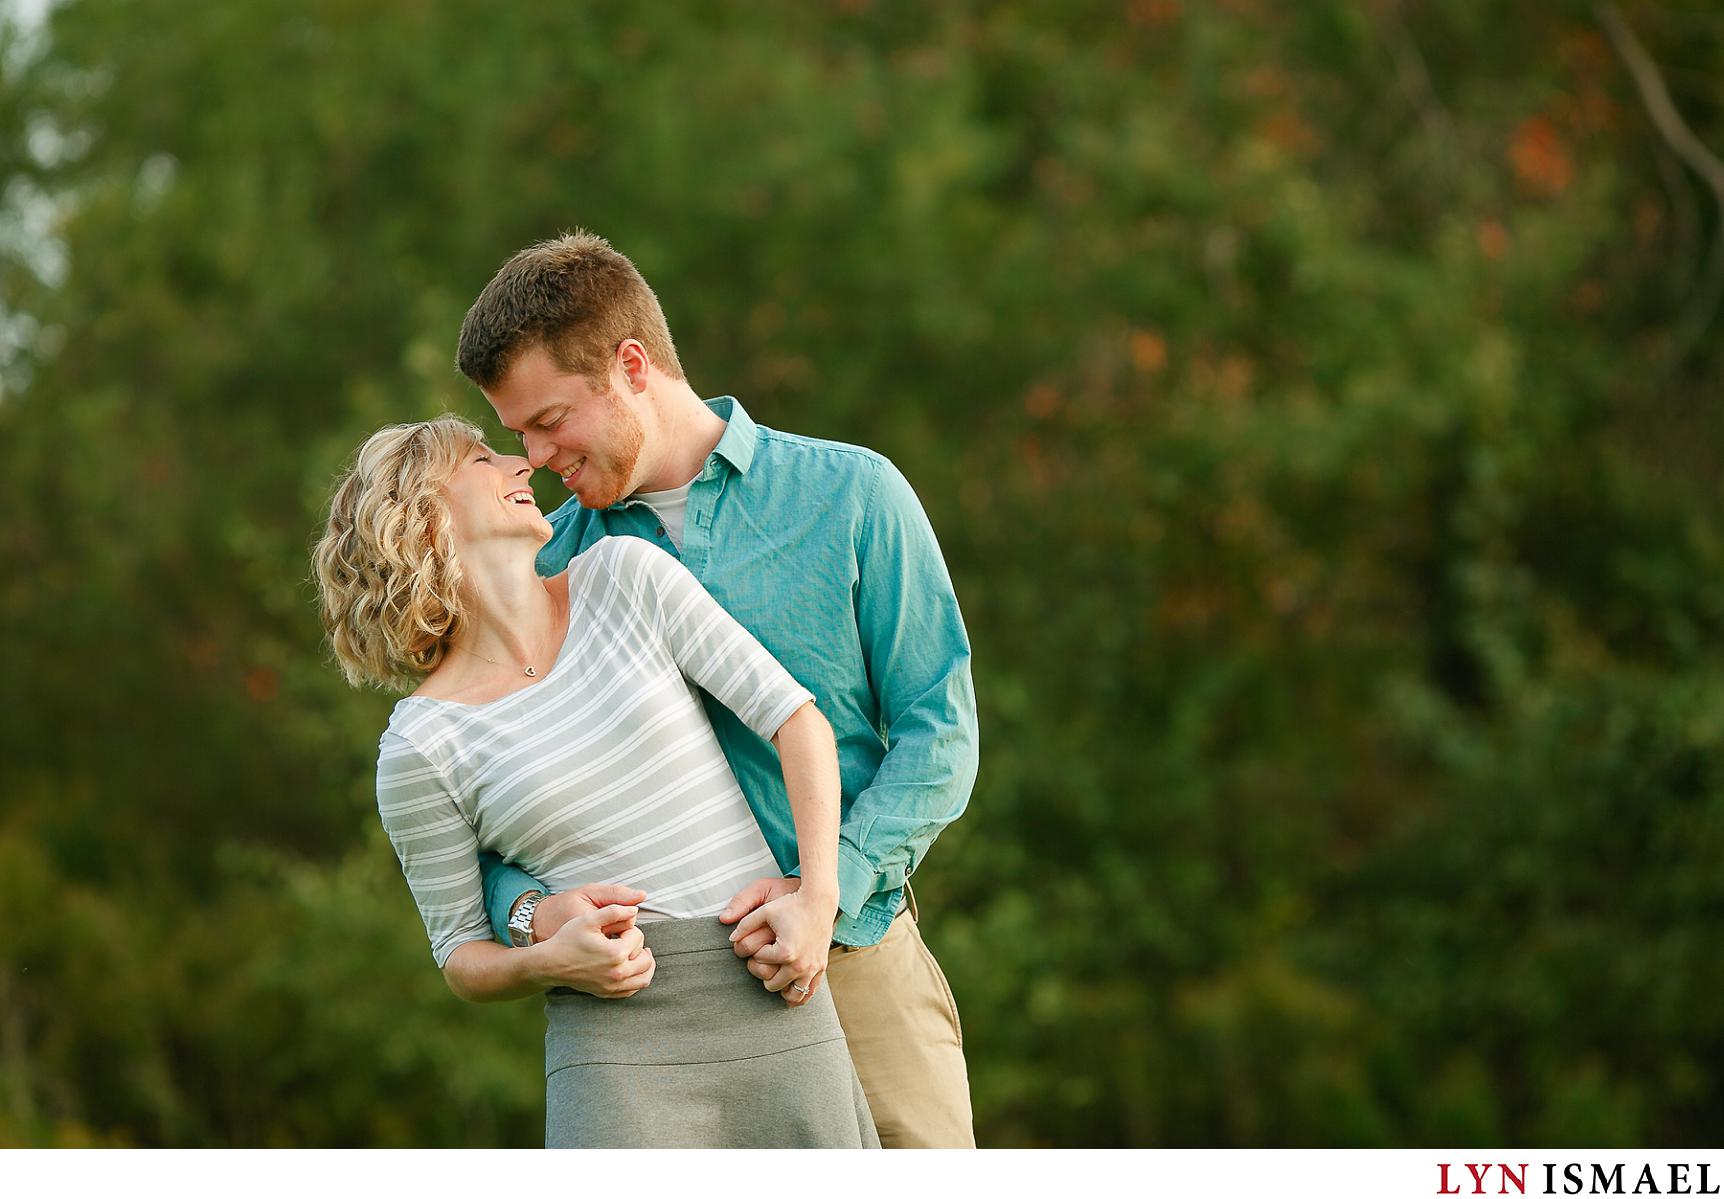 A wedding photographer photographs a couple's engagement session in Kitchener's Huron Natural Area.